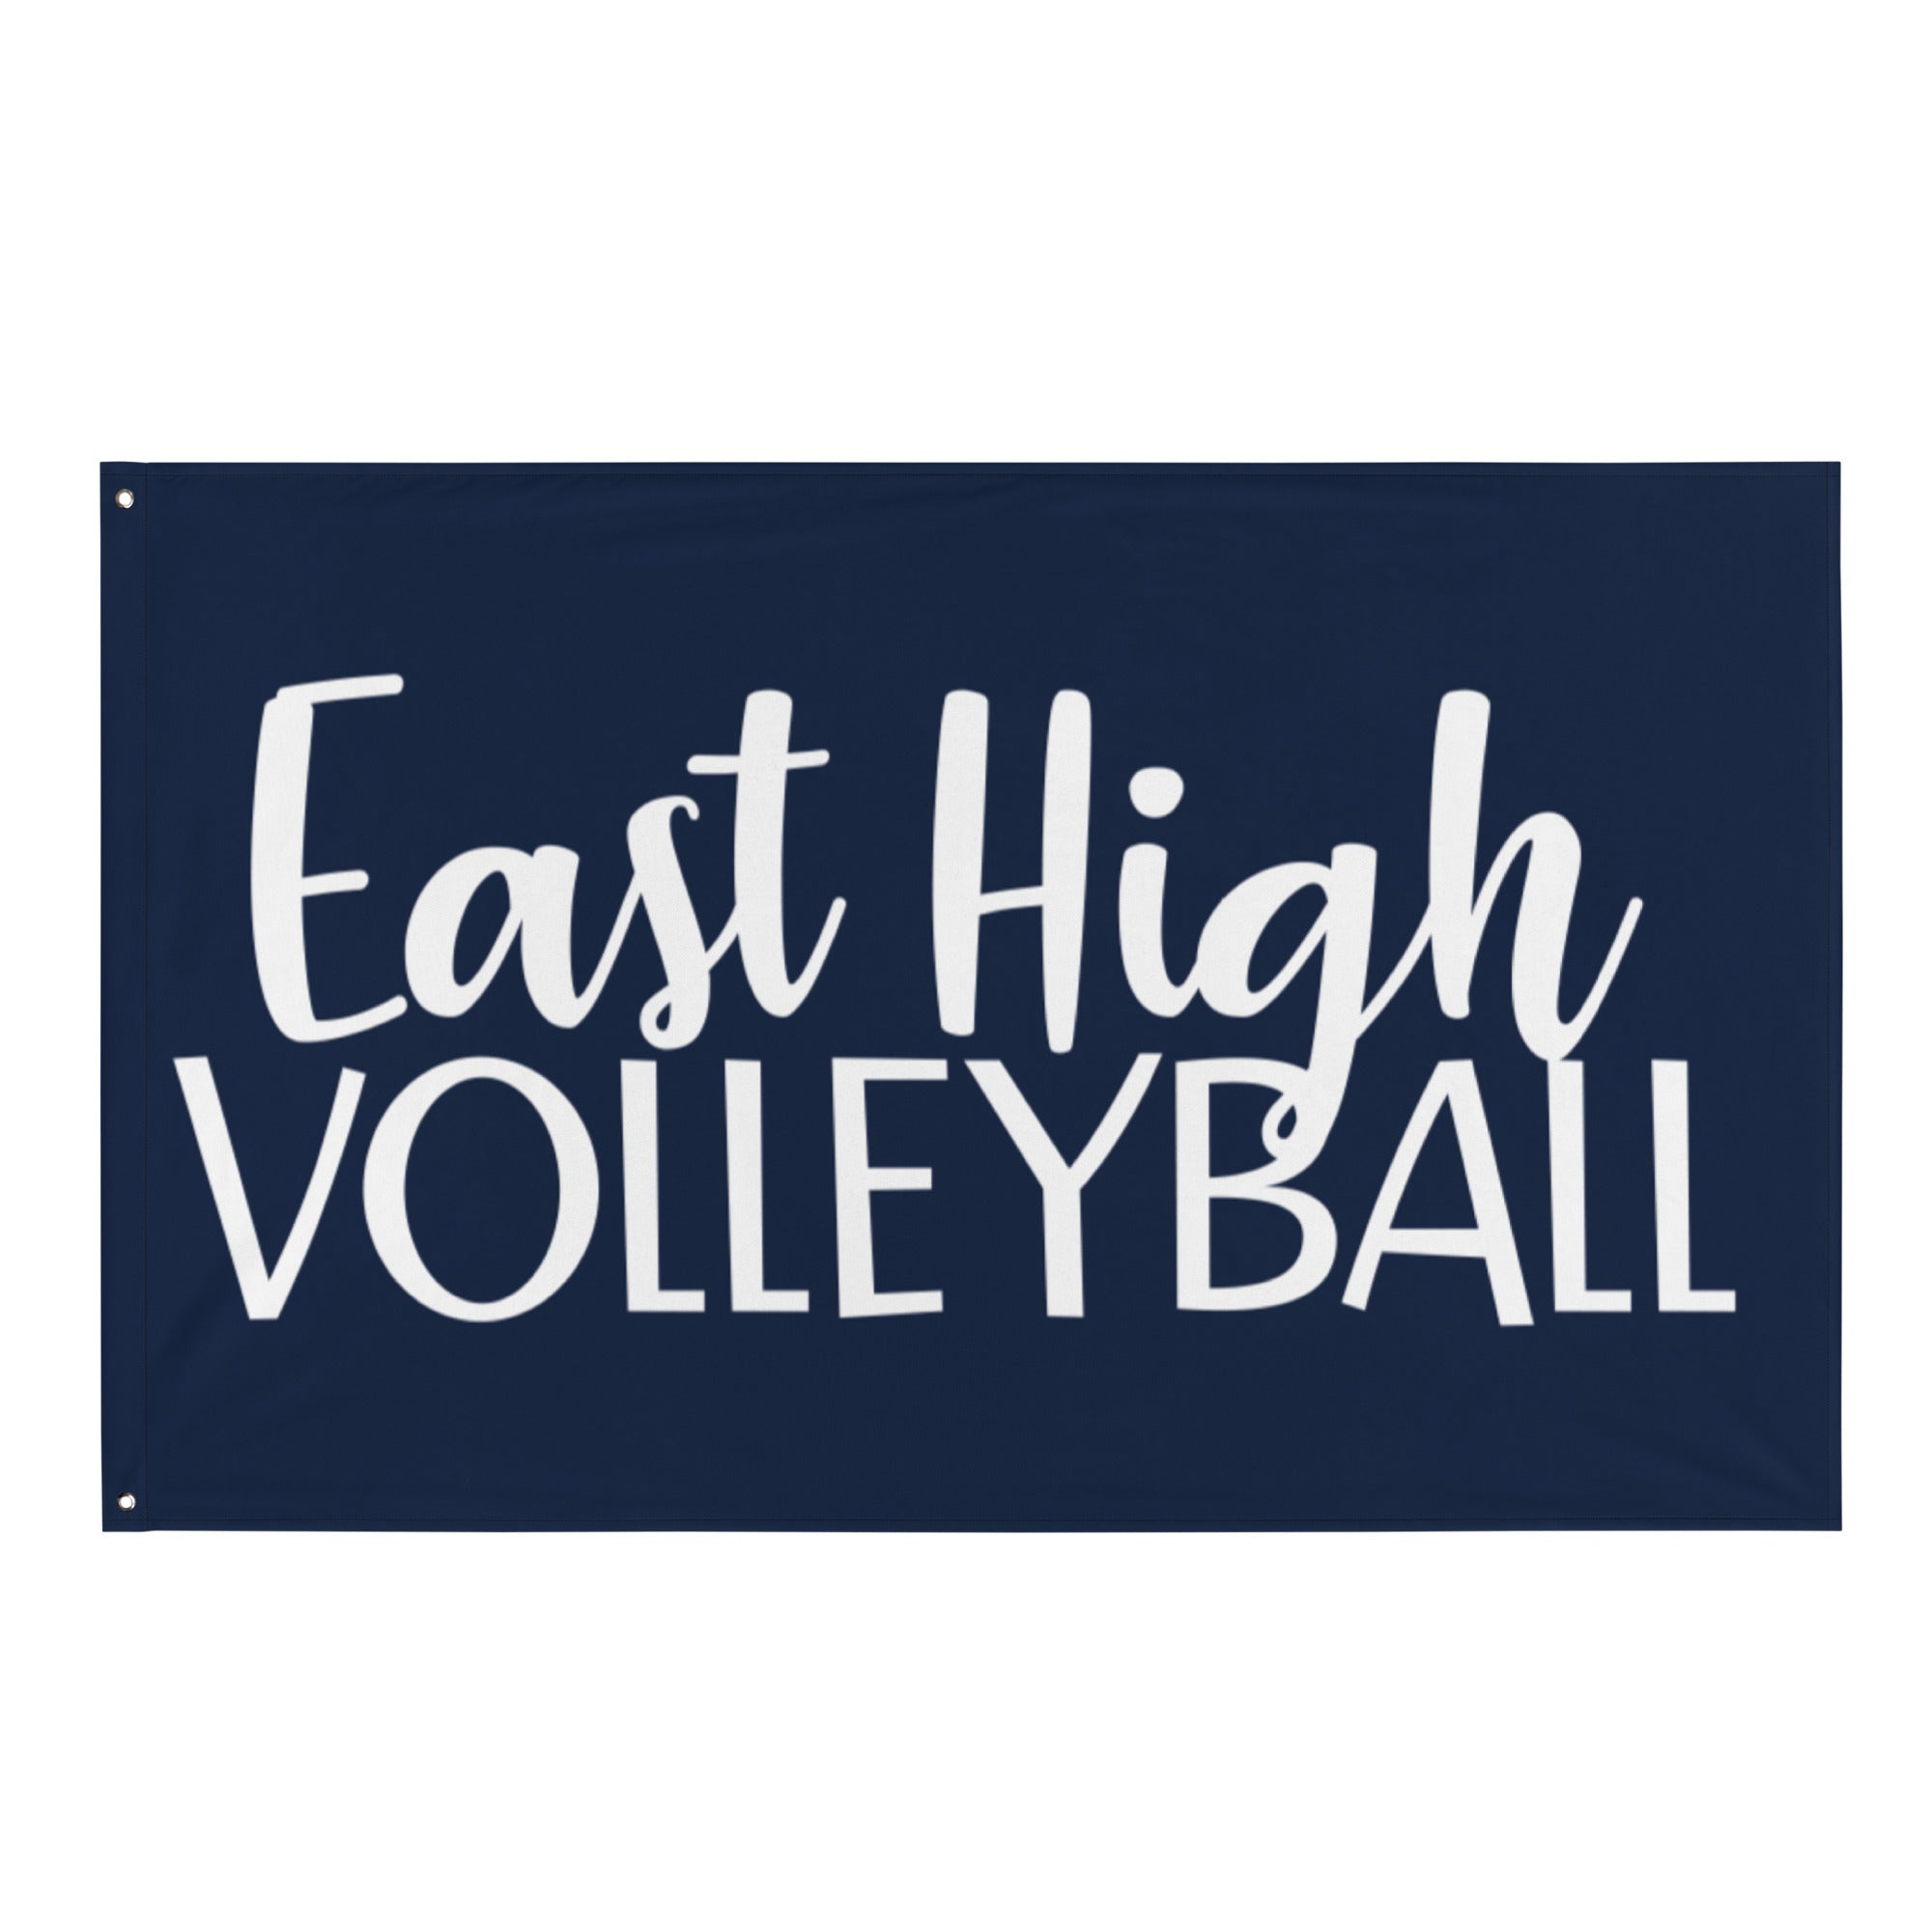 East High Volleyball Flag